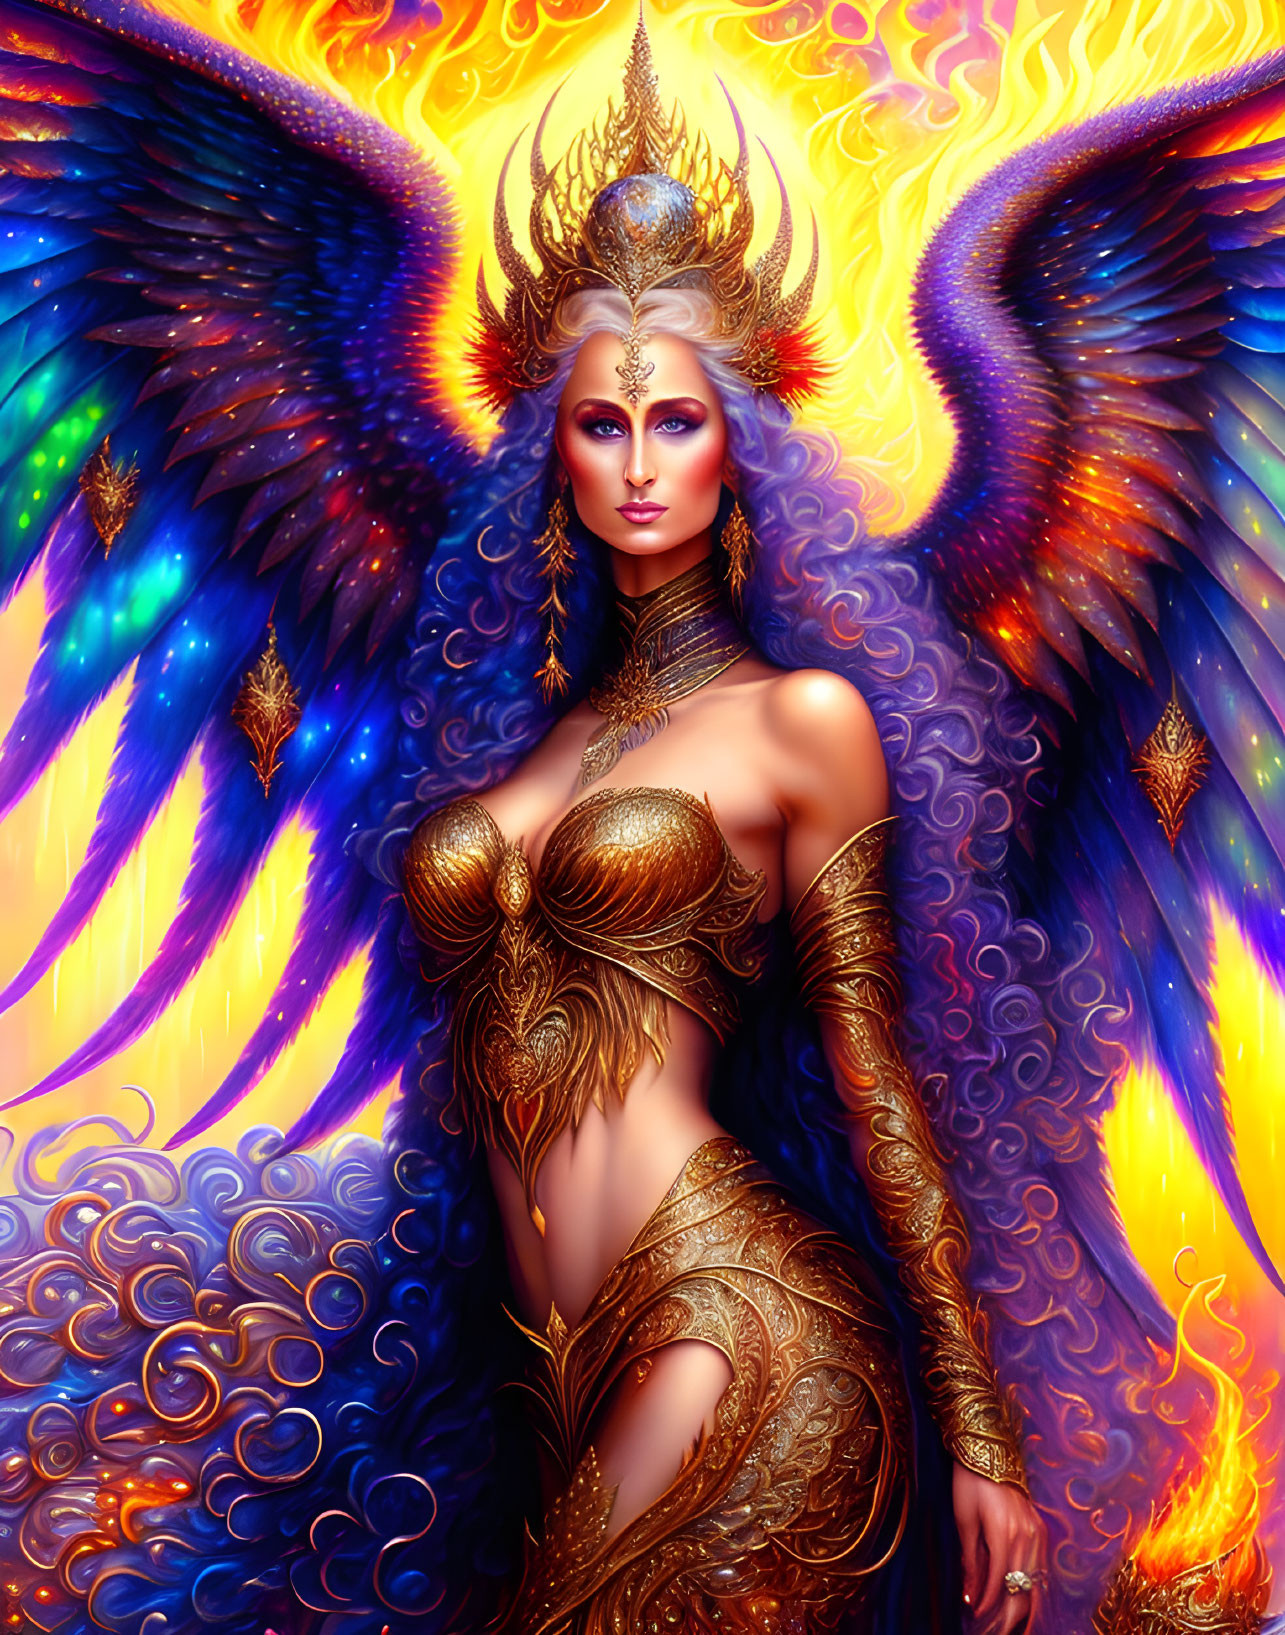 Colorful winged fantasy figure in ornate golden armor on vibrant backdrop